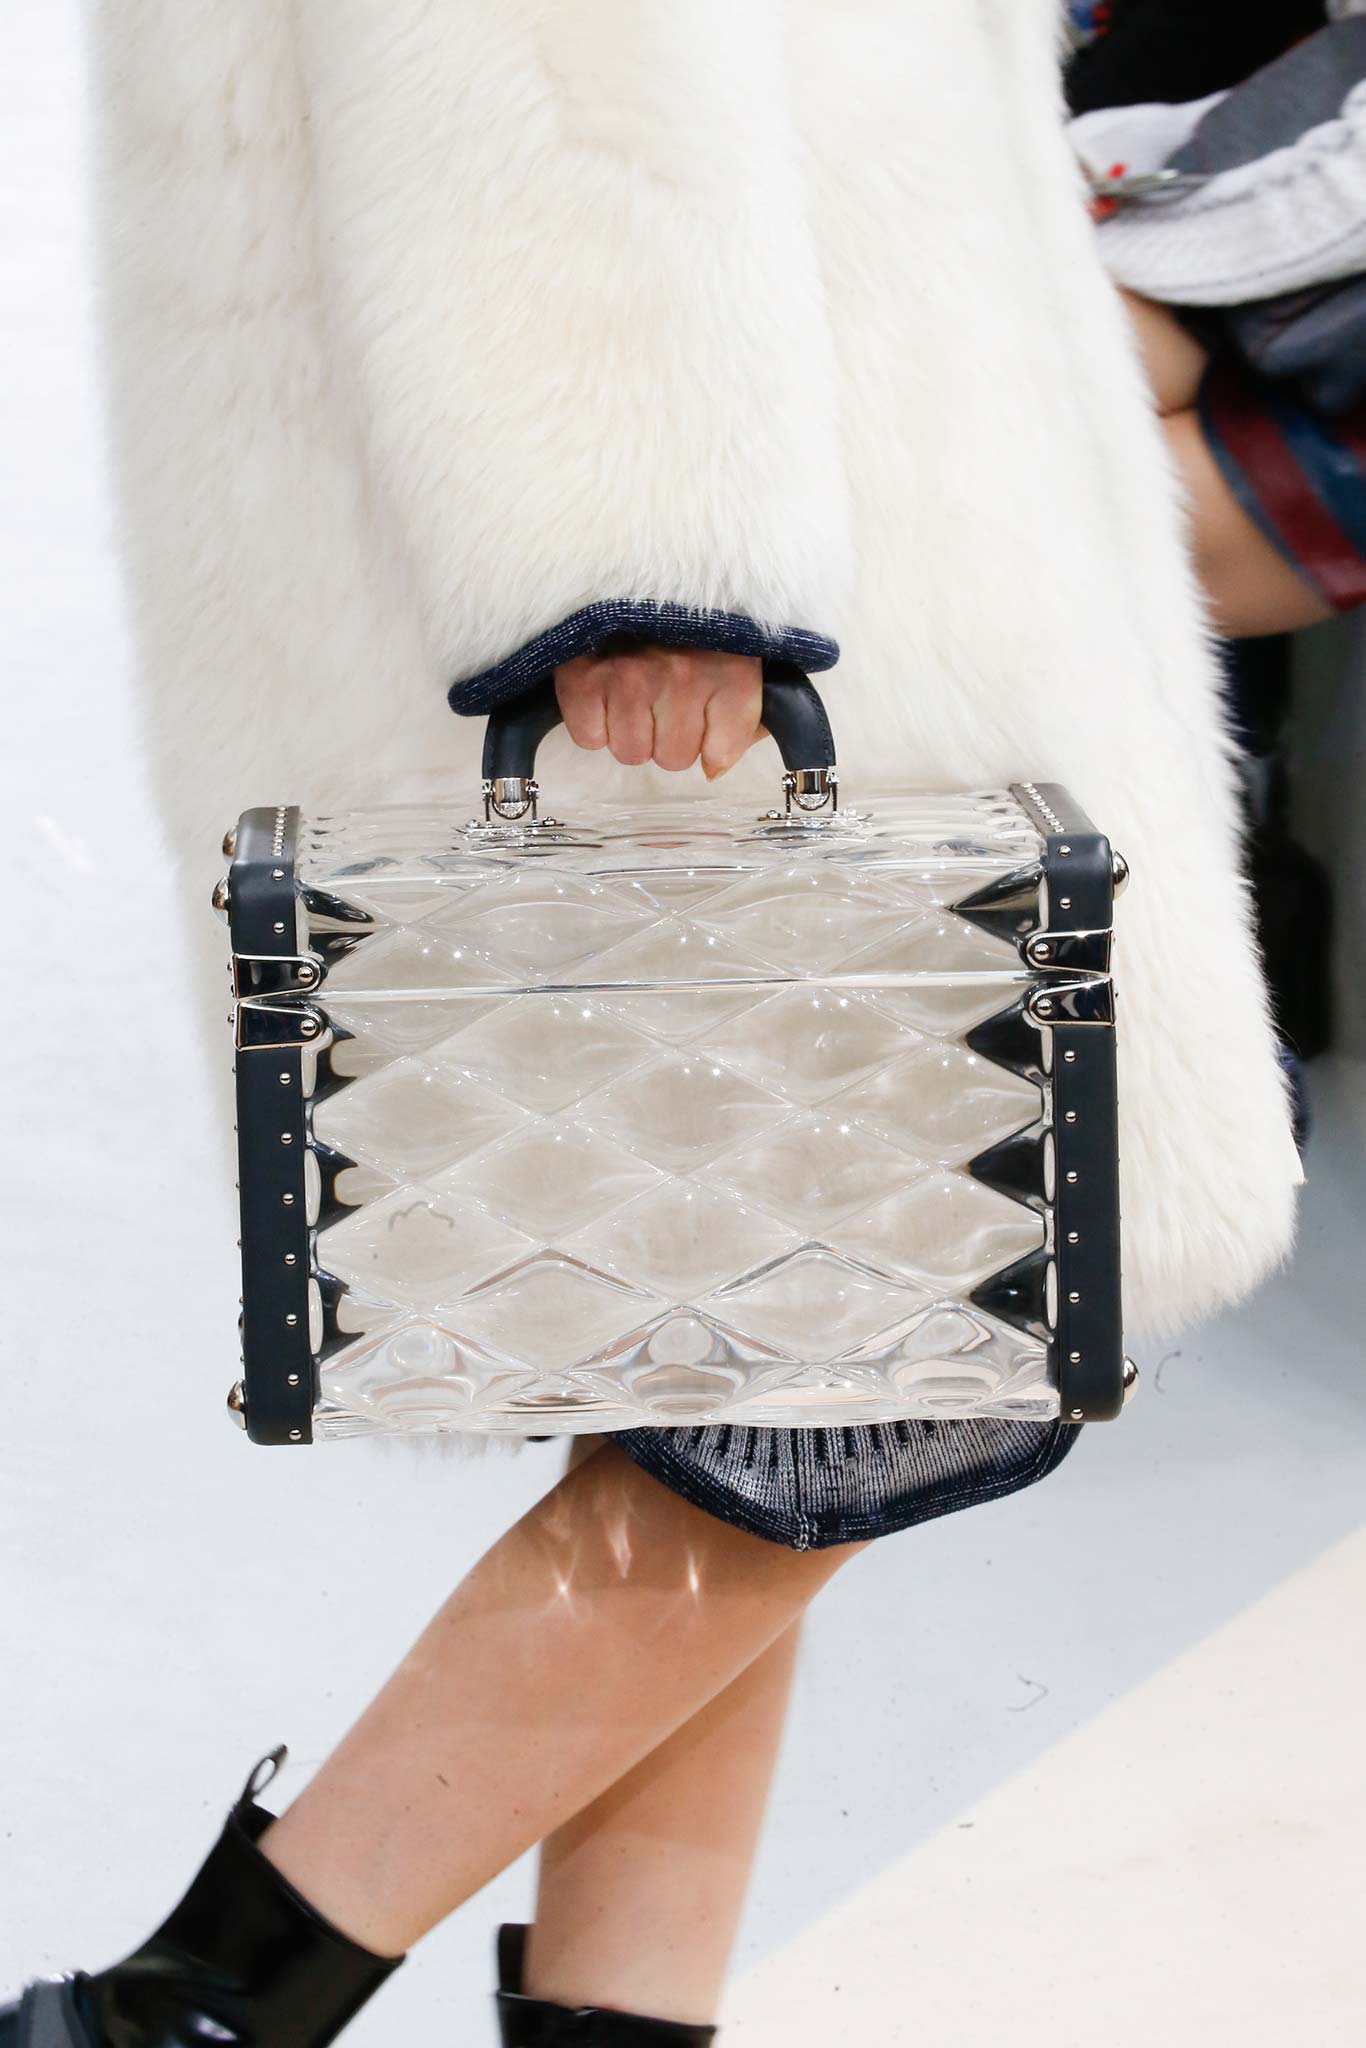 Louis Vuitton Fall/Winter 2015 Runway Bag Collection featuring Mini Trunks | Spotted Fashion